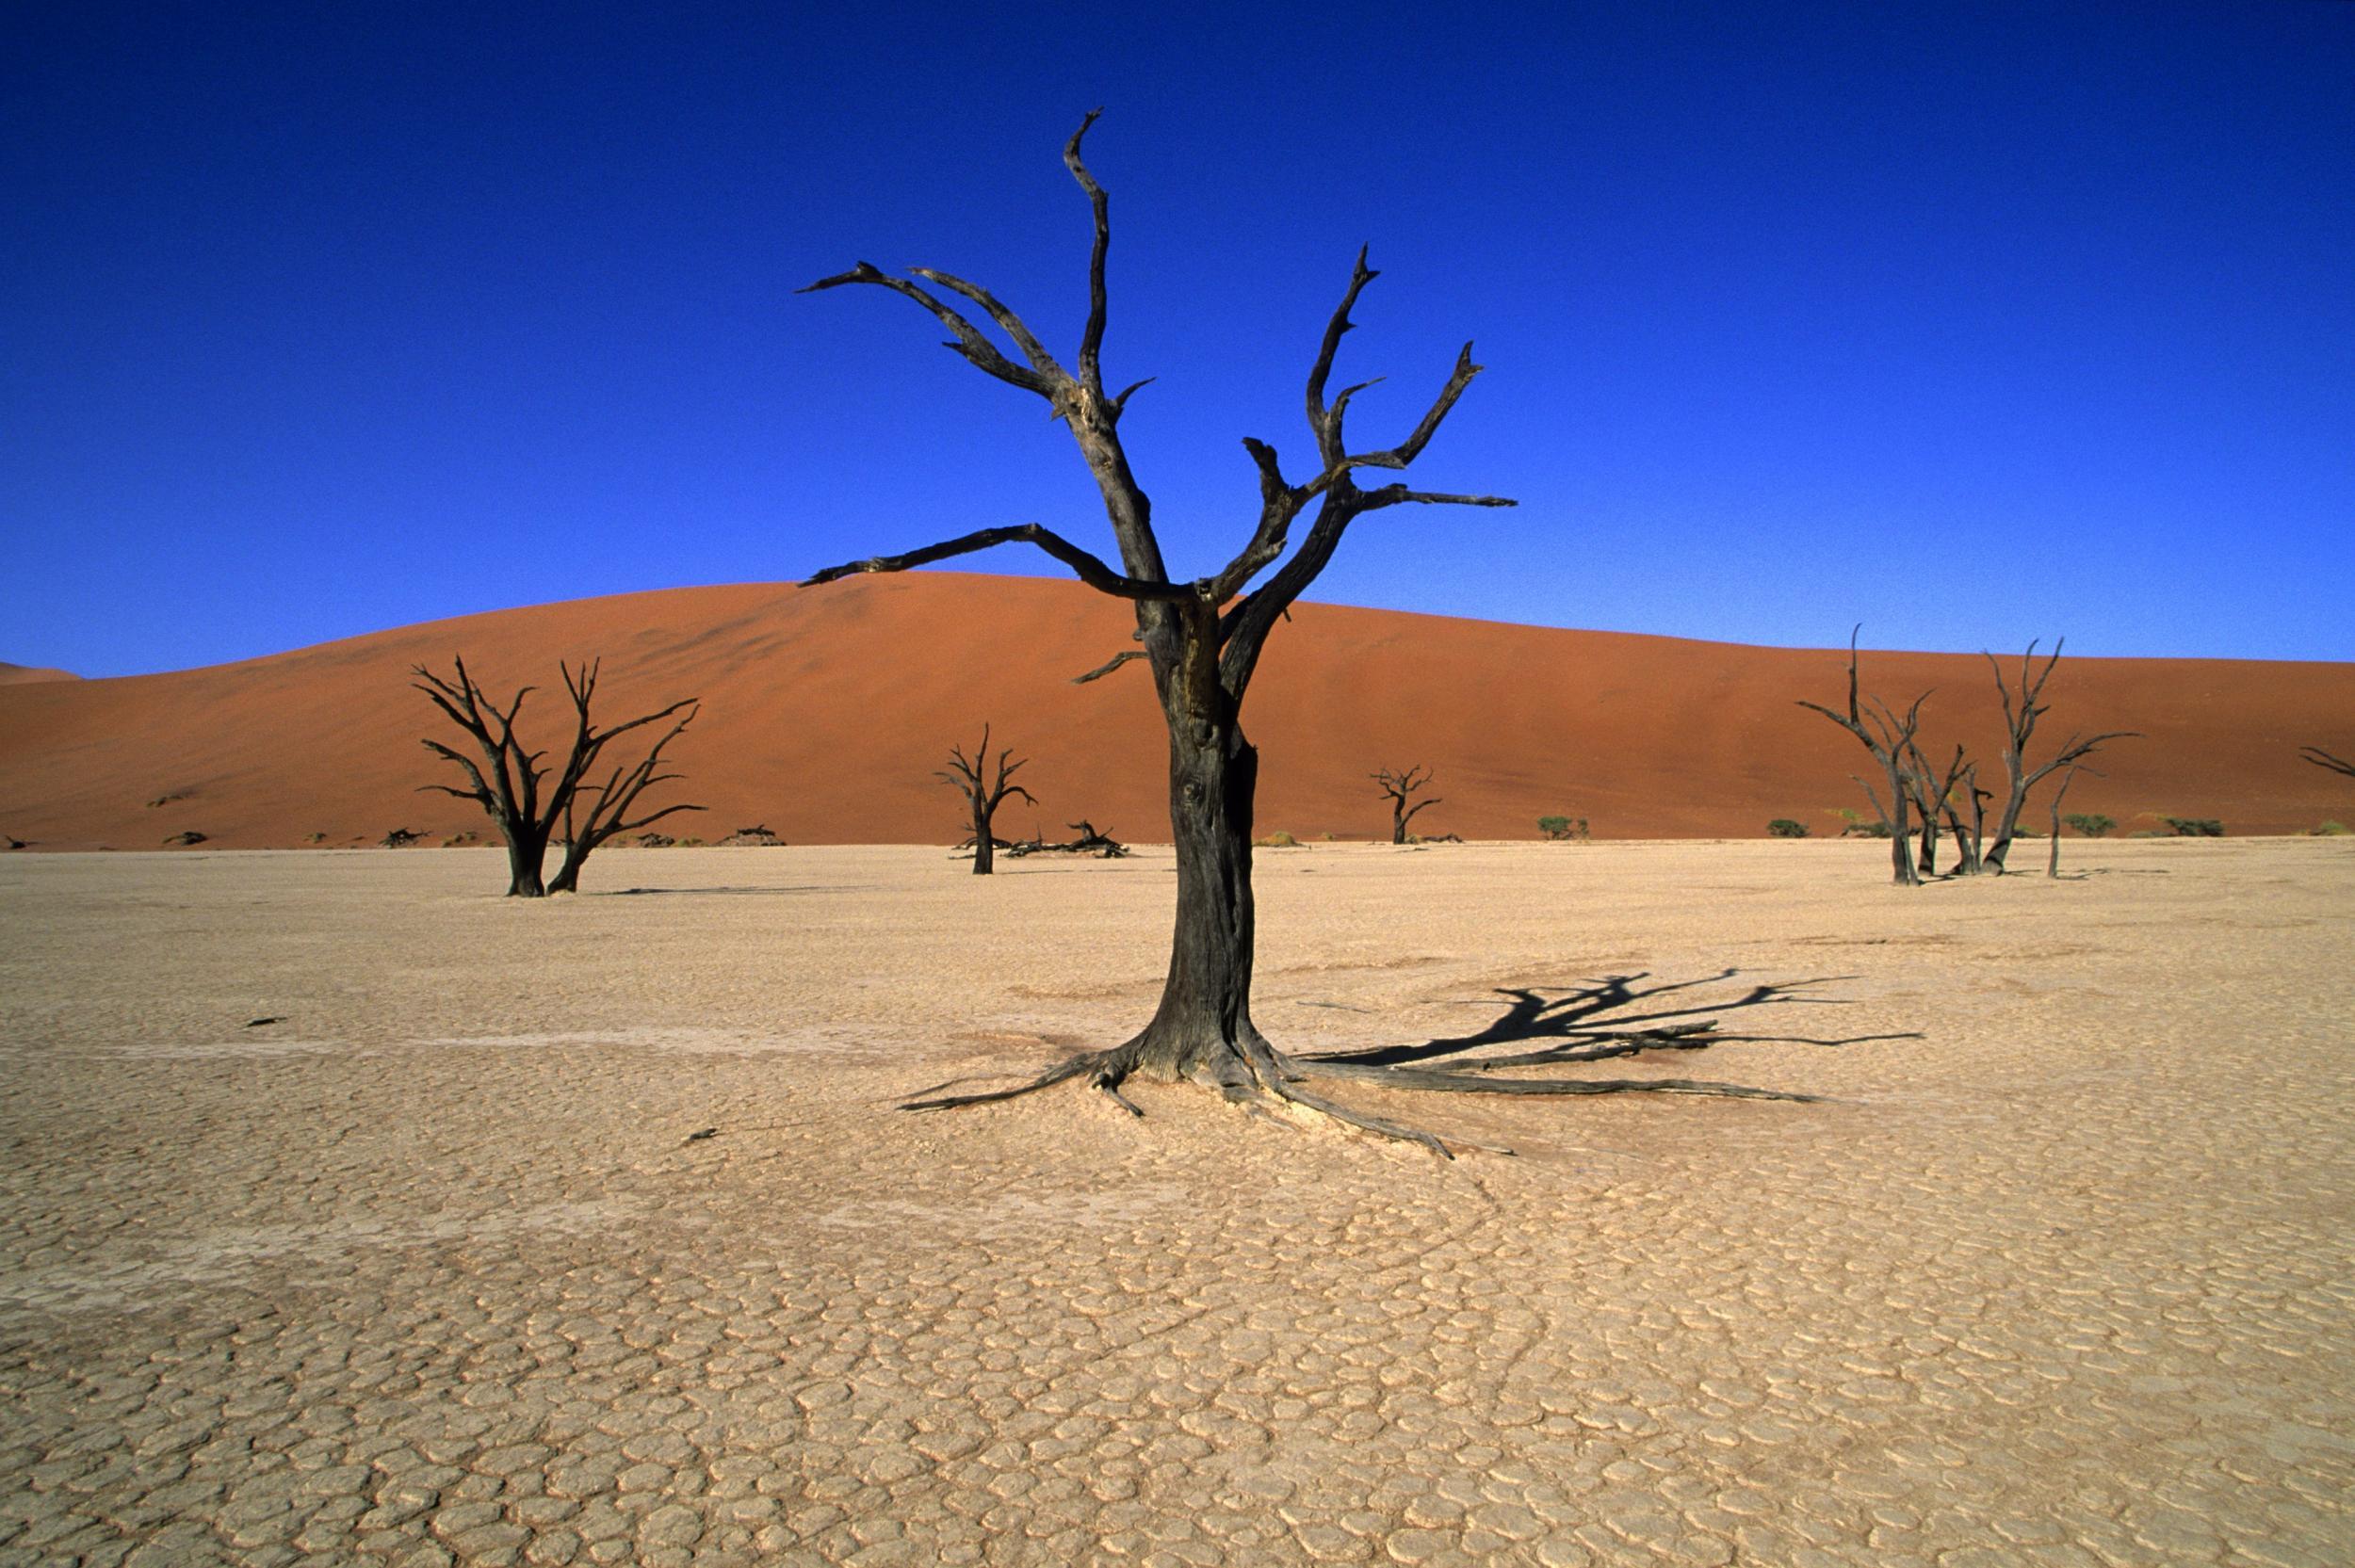 The sun-scorched trees of Deadvlei